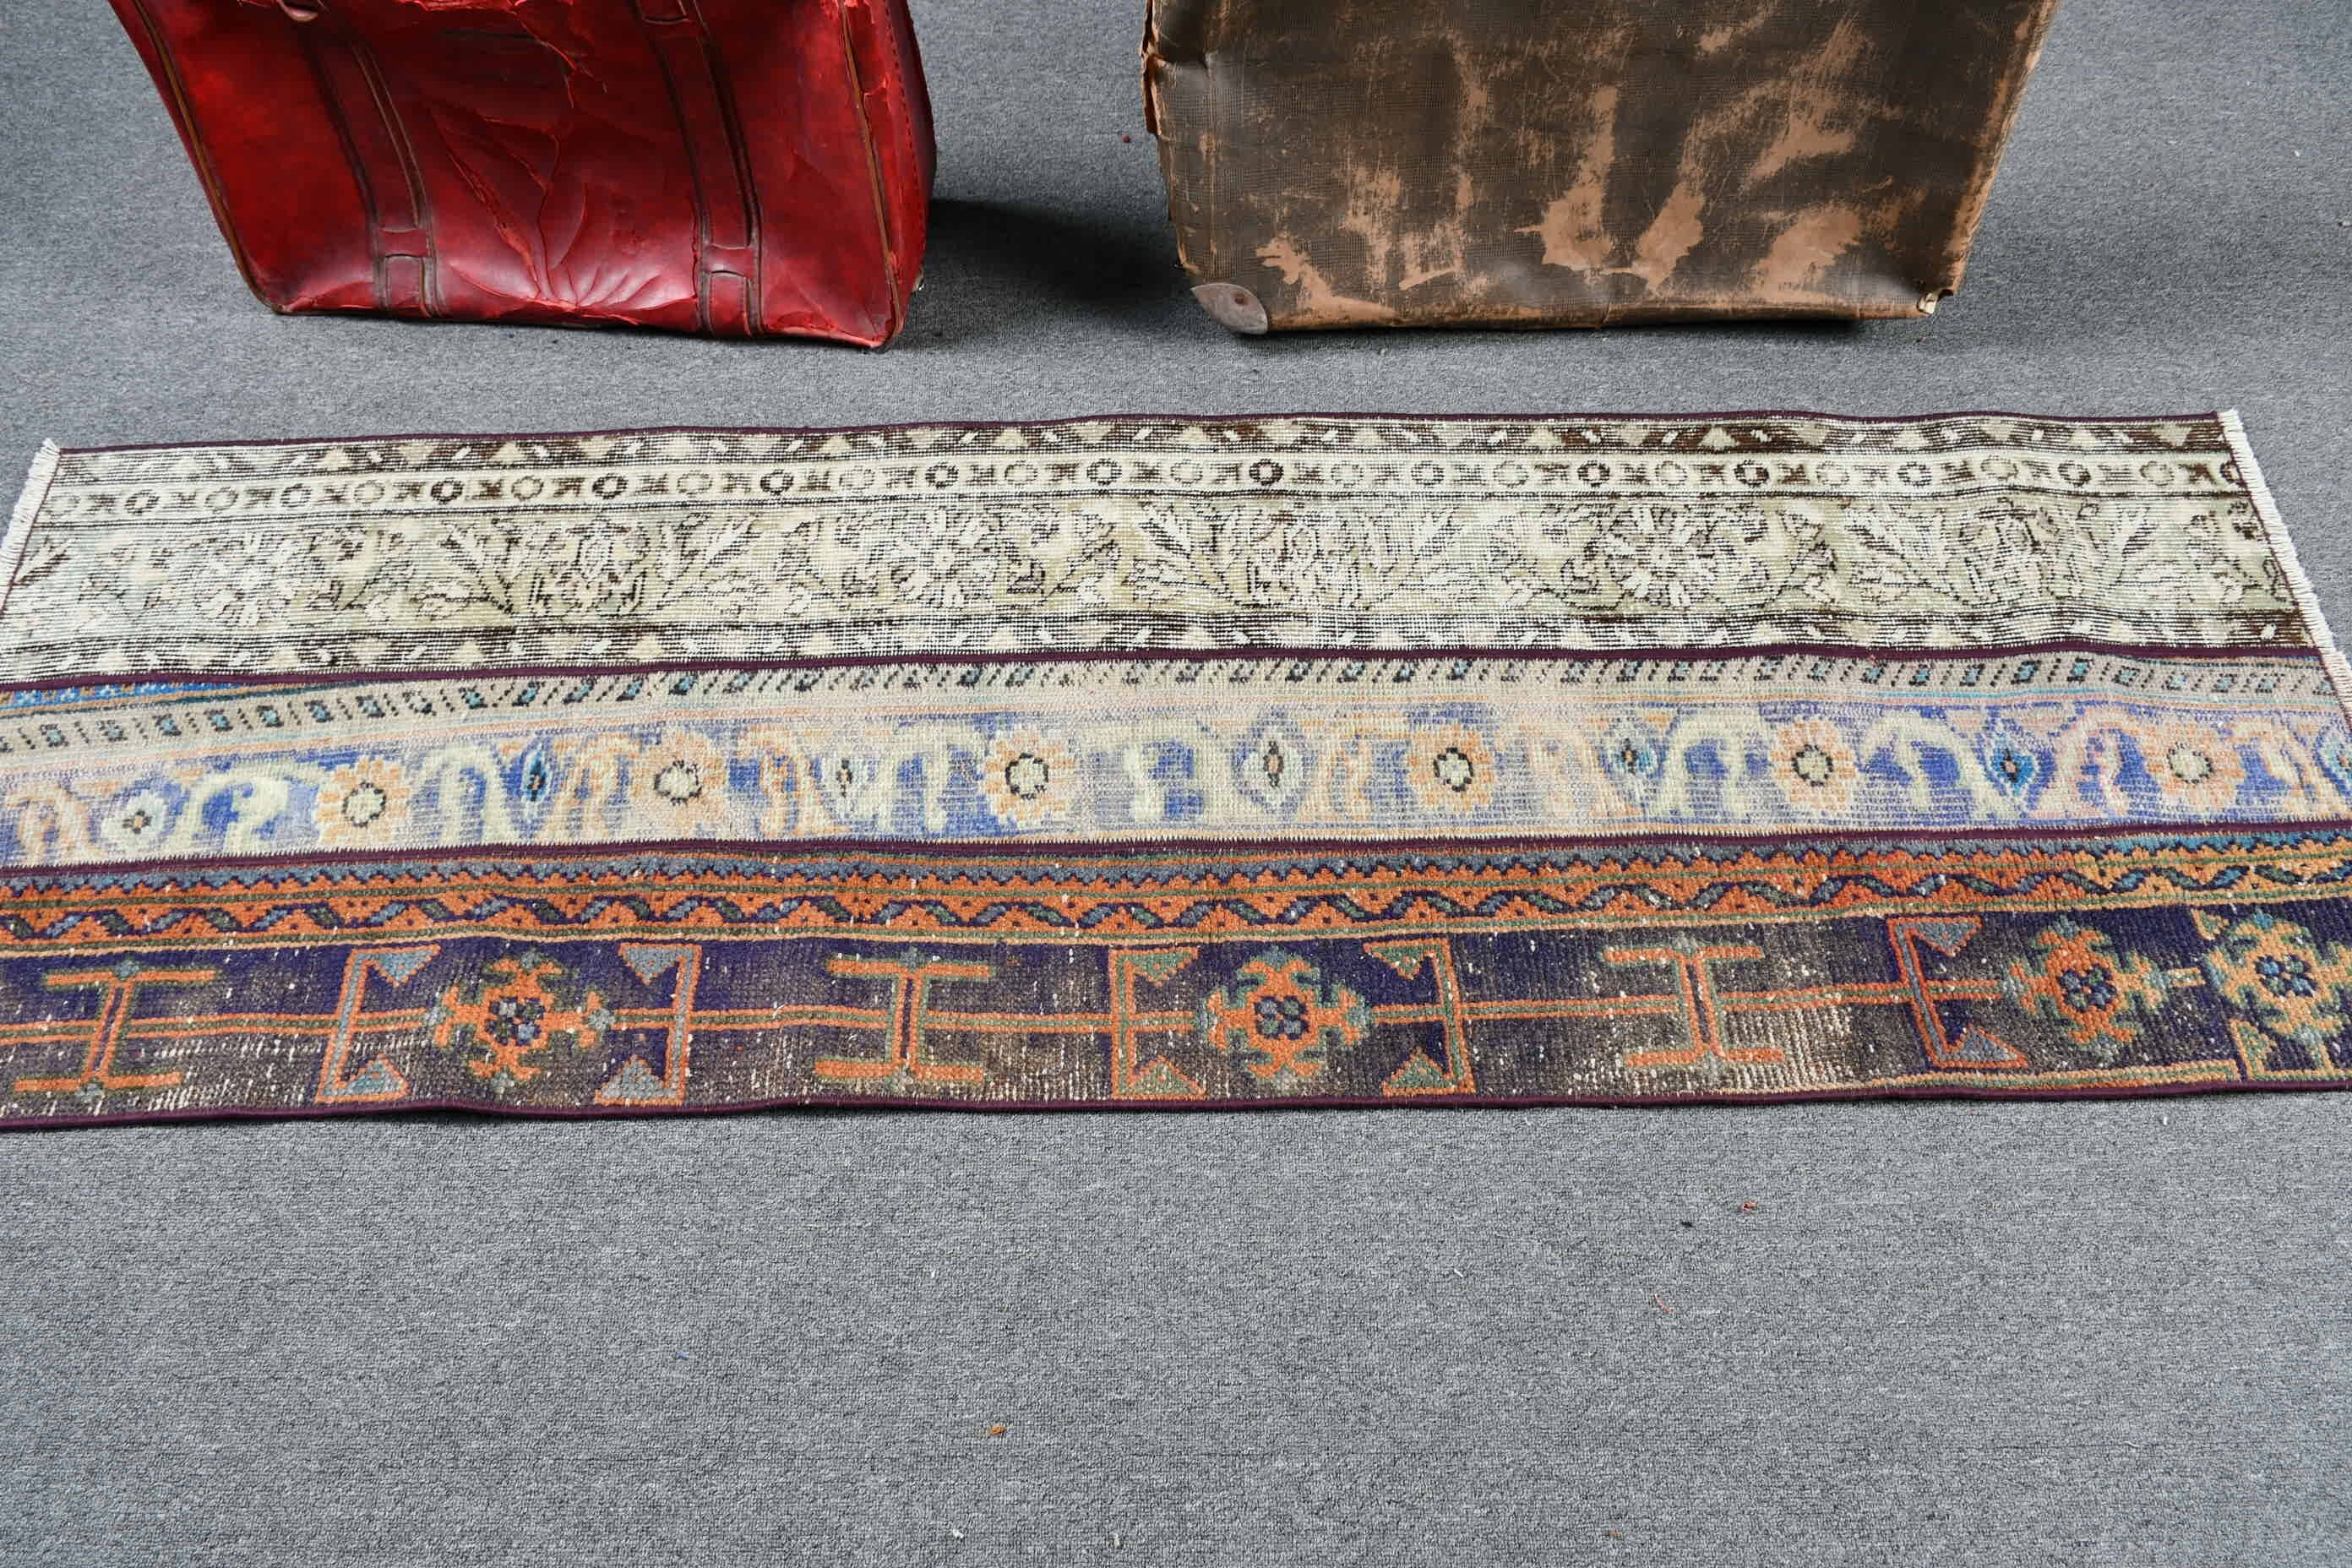 2.2x6.6 ft Runner Rug, Cool Rug, Kitchen Rugs, Anatolian Rugs, Eclectic Rugs, Vintage Rug, Green Anatolian Rug, Turkish Rugs, Stair Rugs